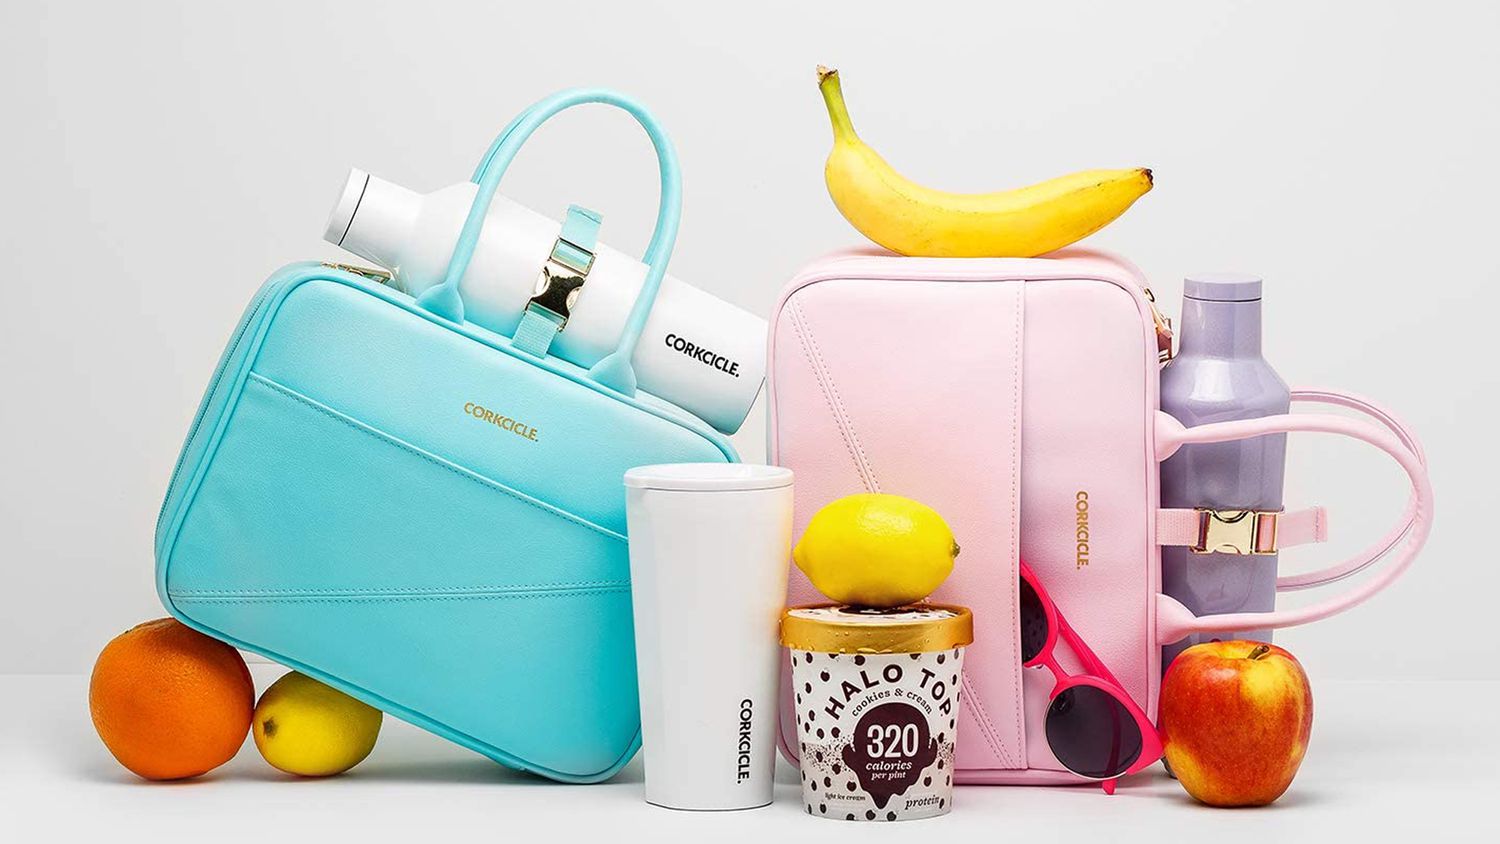 Amazon's Lunch Box: best lunch bags for work, school